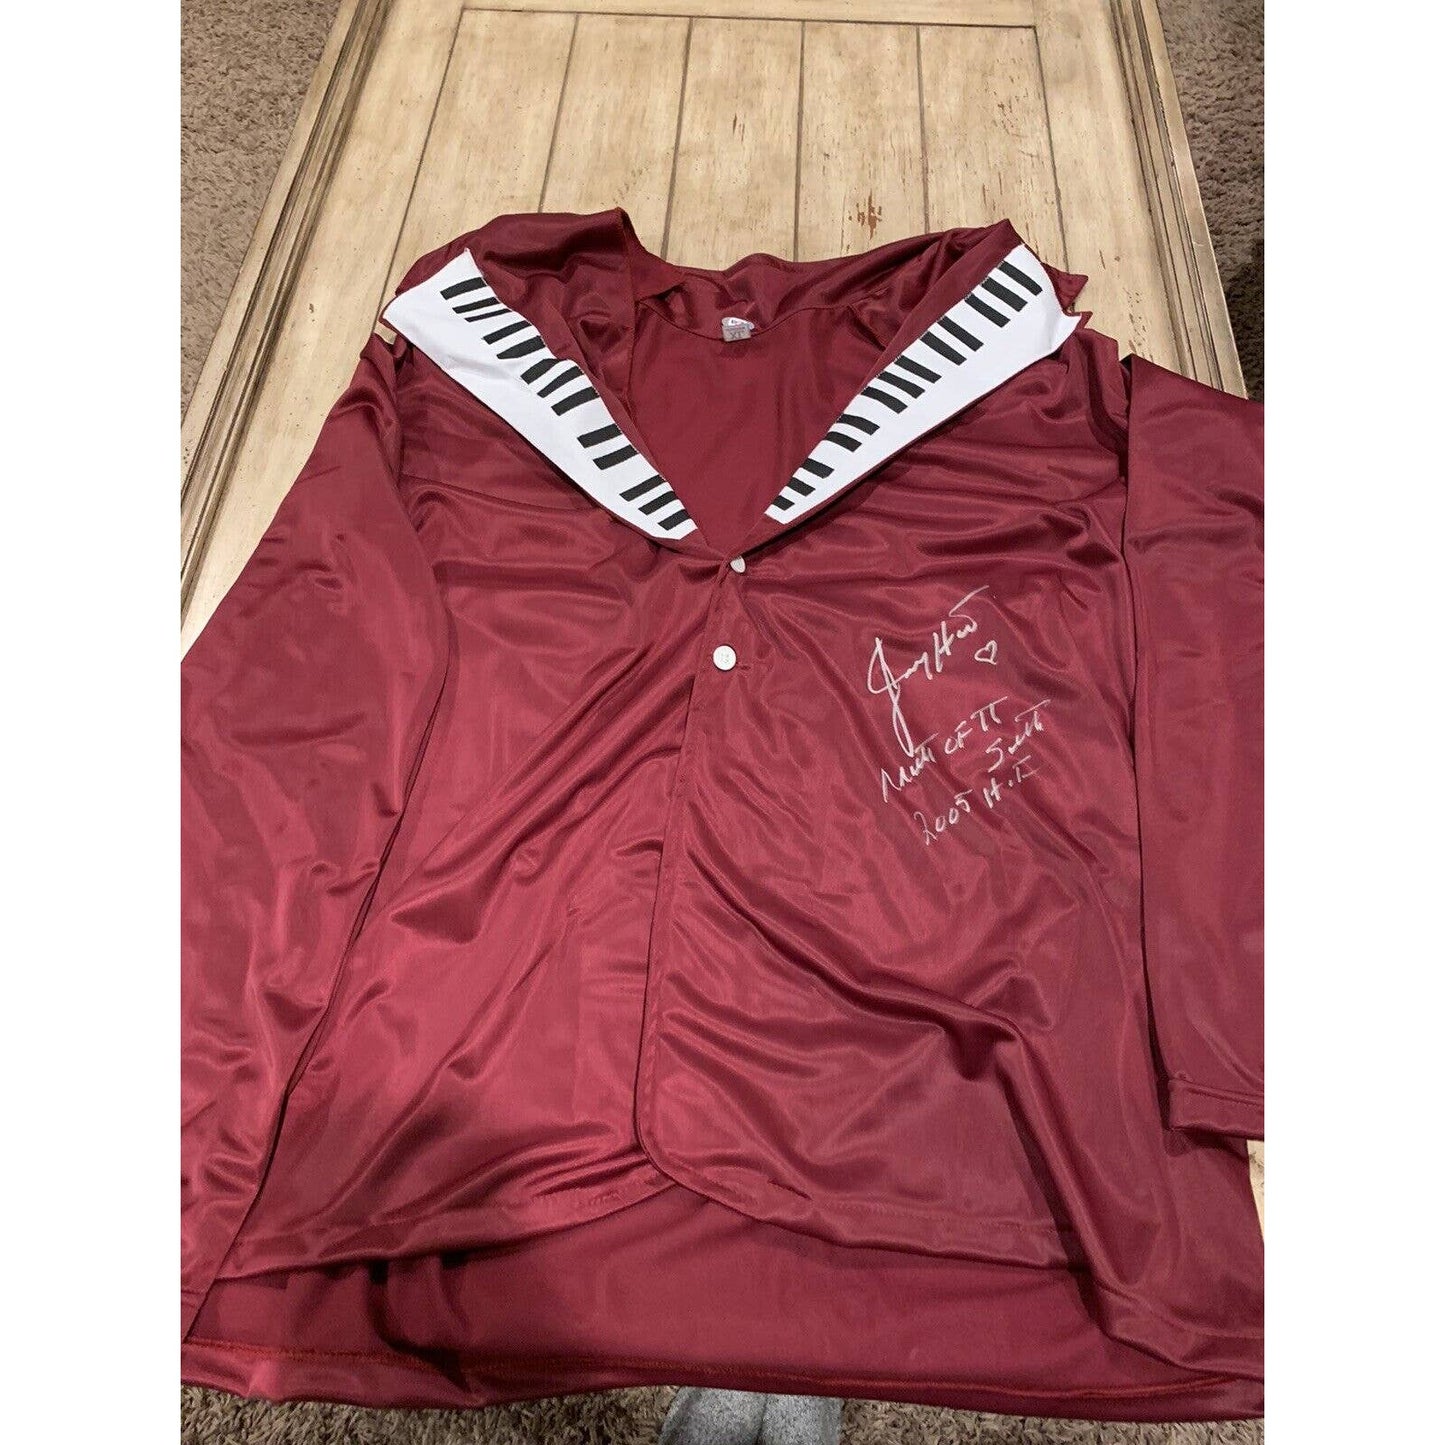 Jimmy Hart Autographed/Signed Jacket PSA/DNA COA Mouth Of The South - TreasuresEvolved